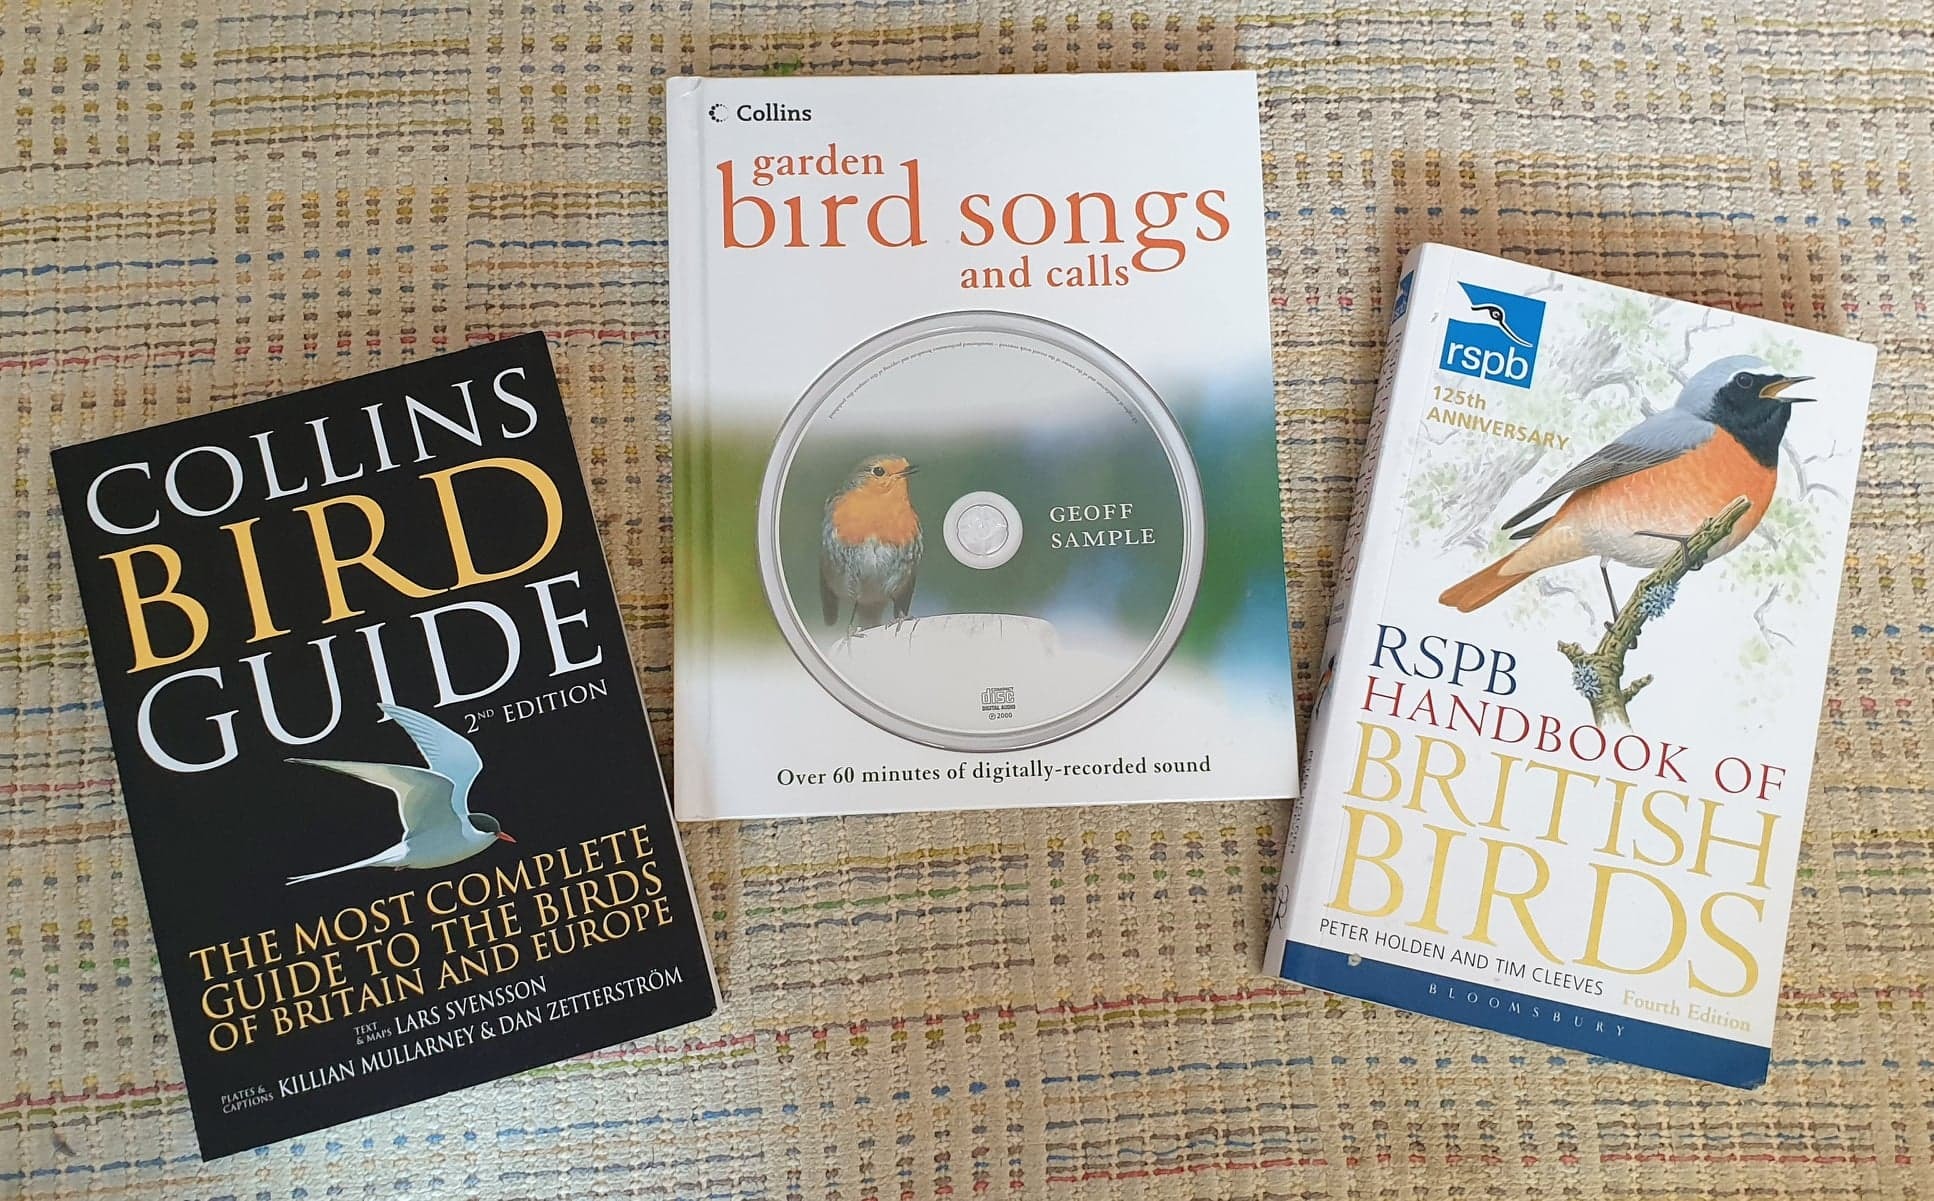 LISTEN, READ AND LEARN: Essential reading and listening to get started with birdwatching